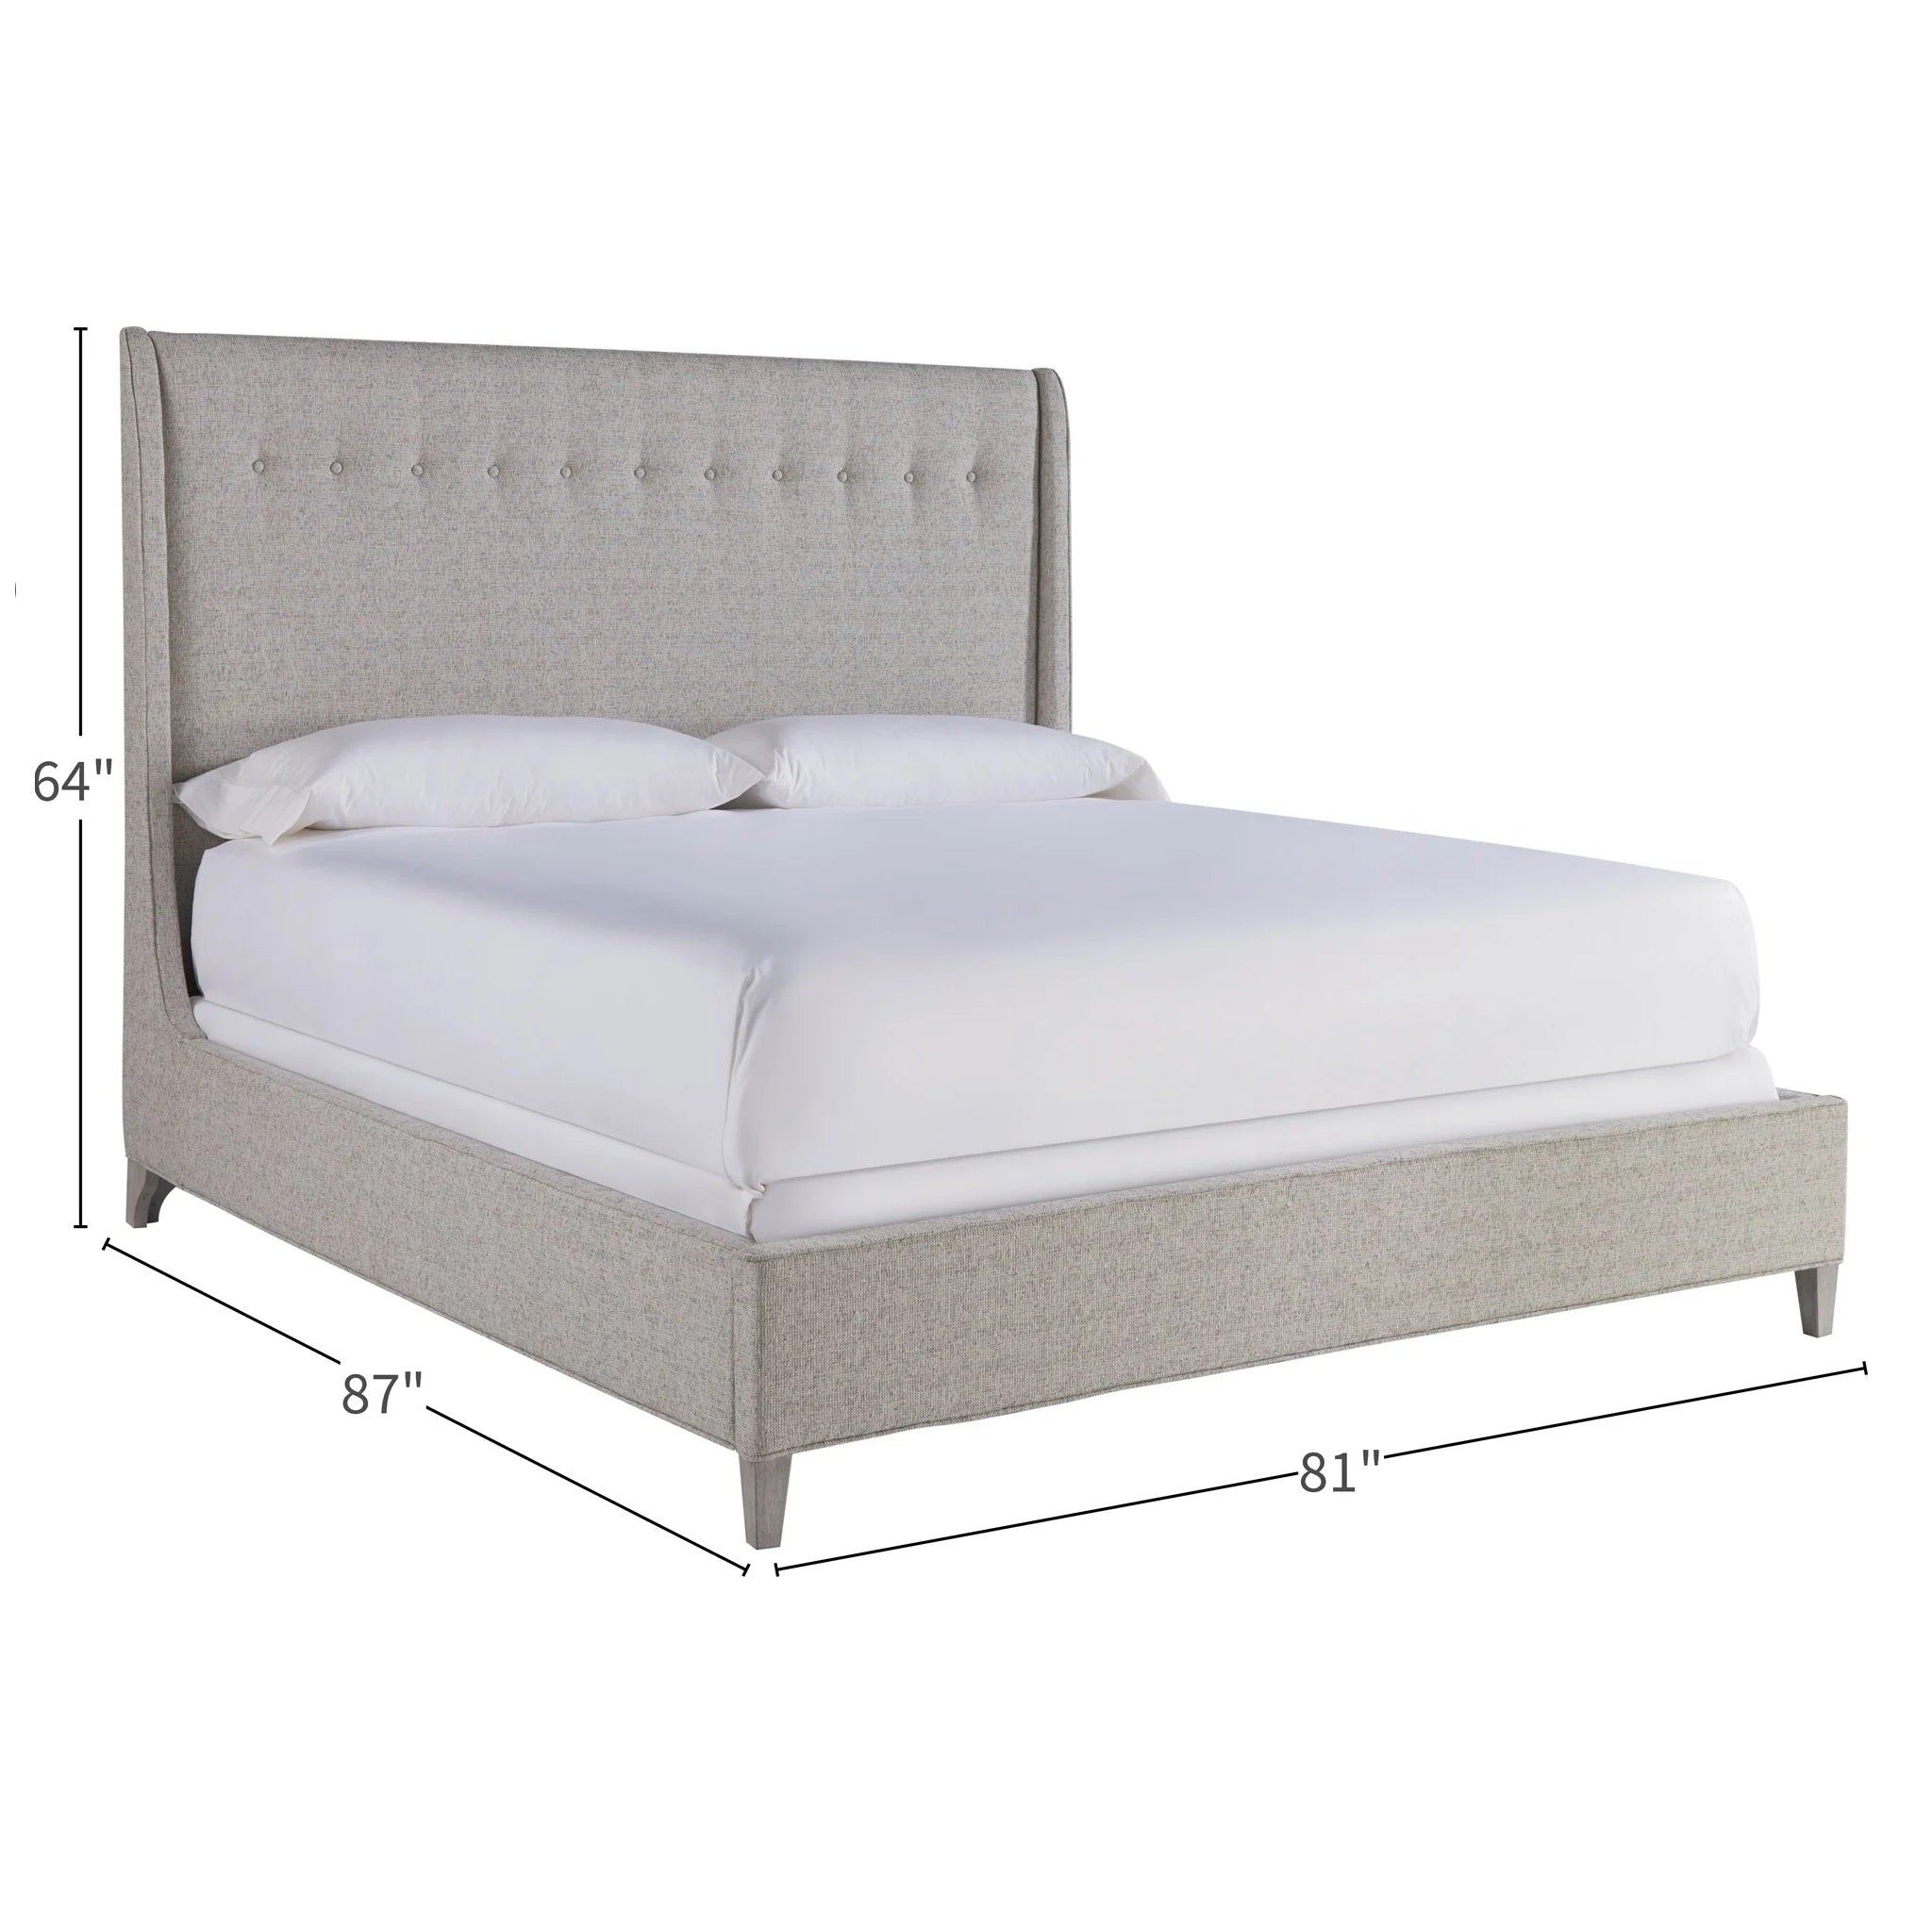 MIDTOWN KING UPHOLSTERED BED